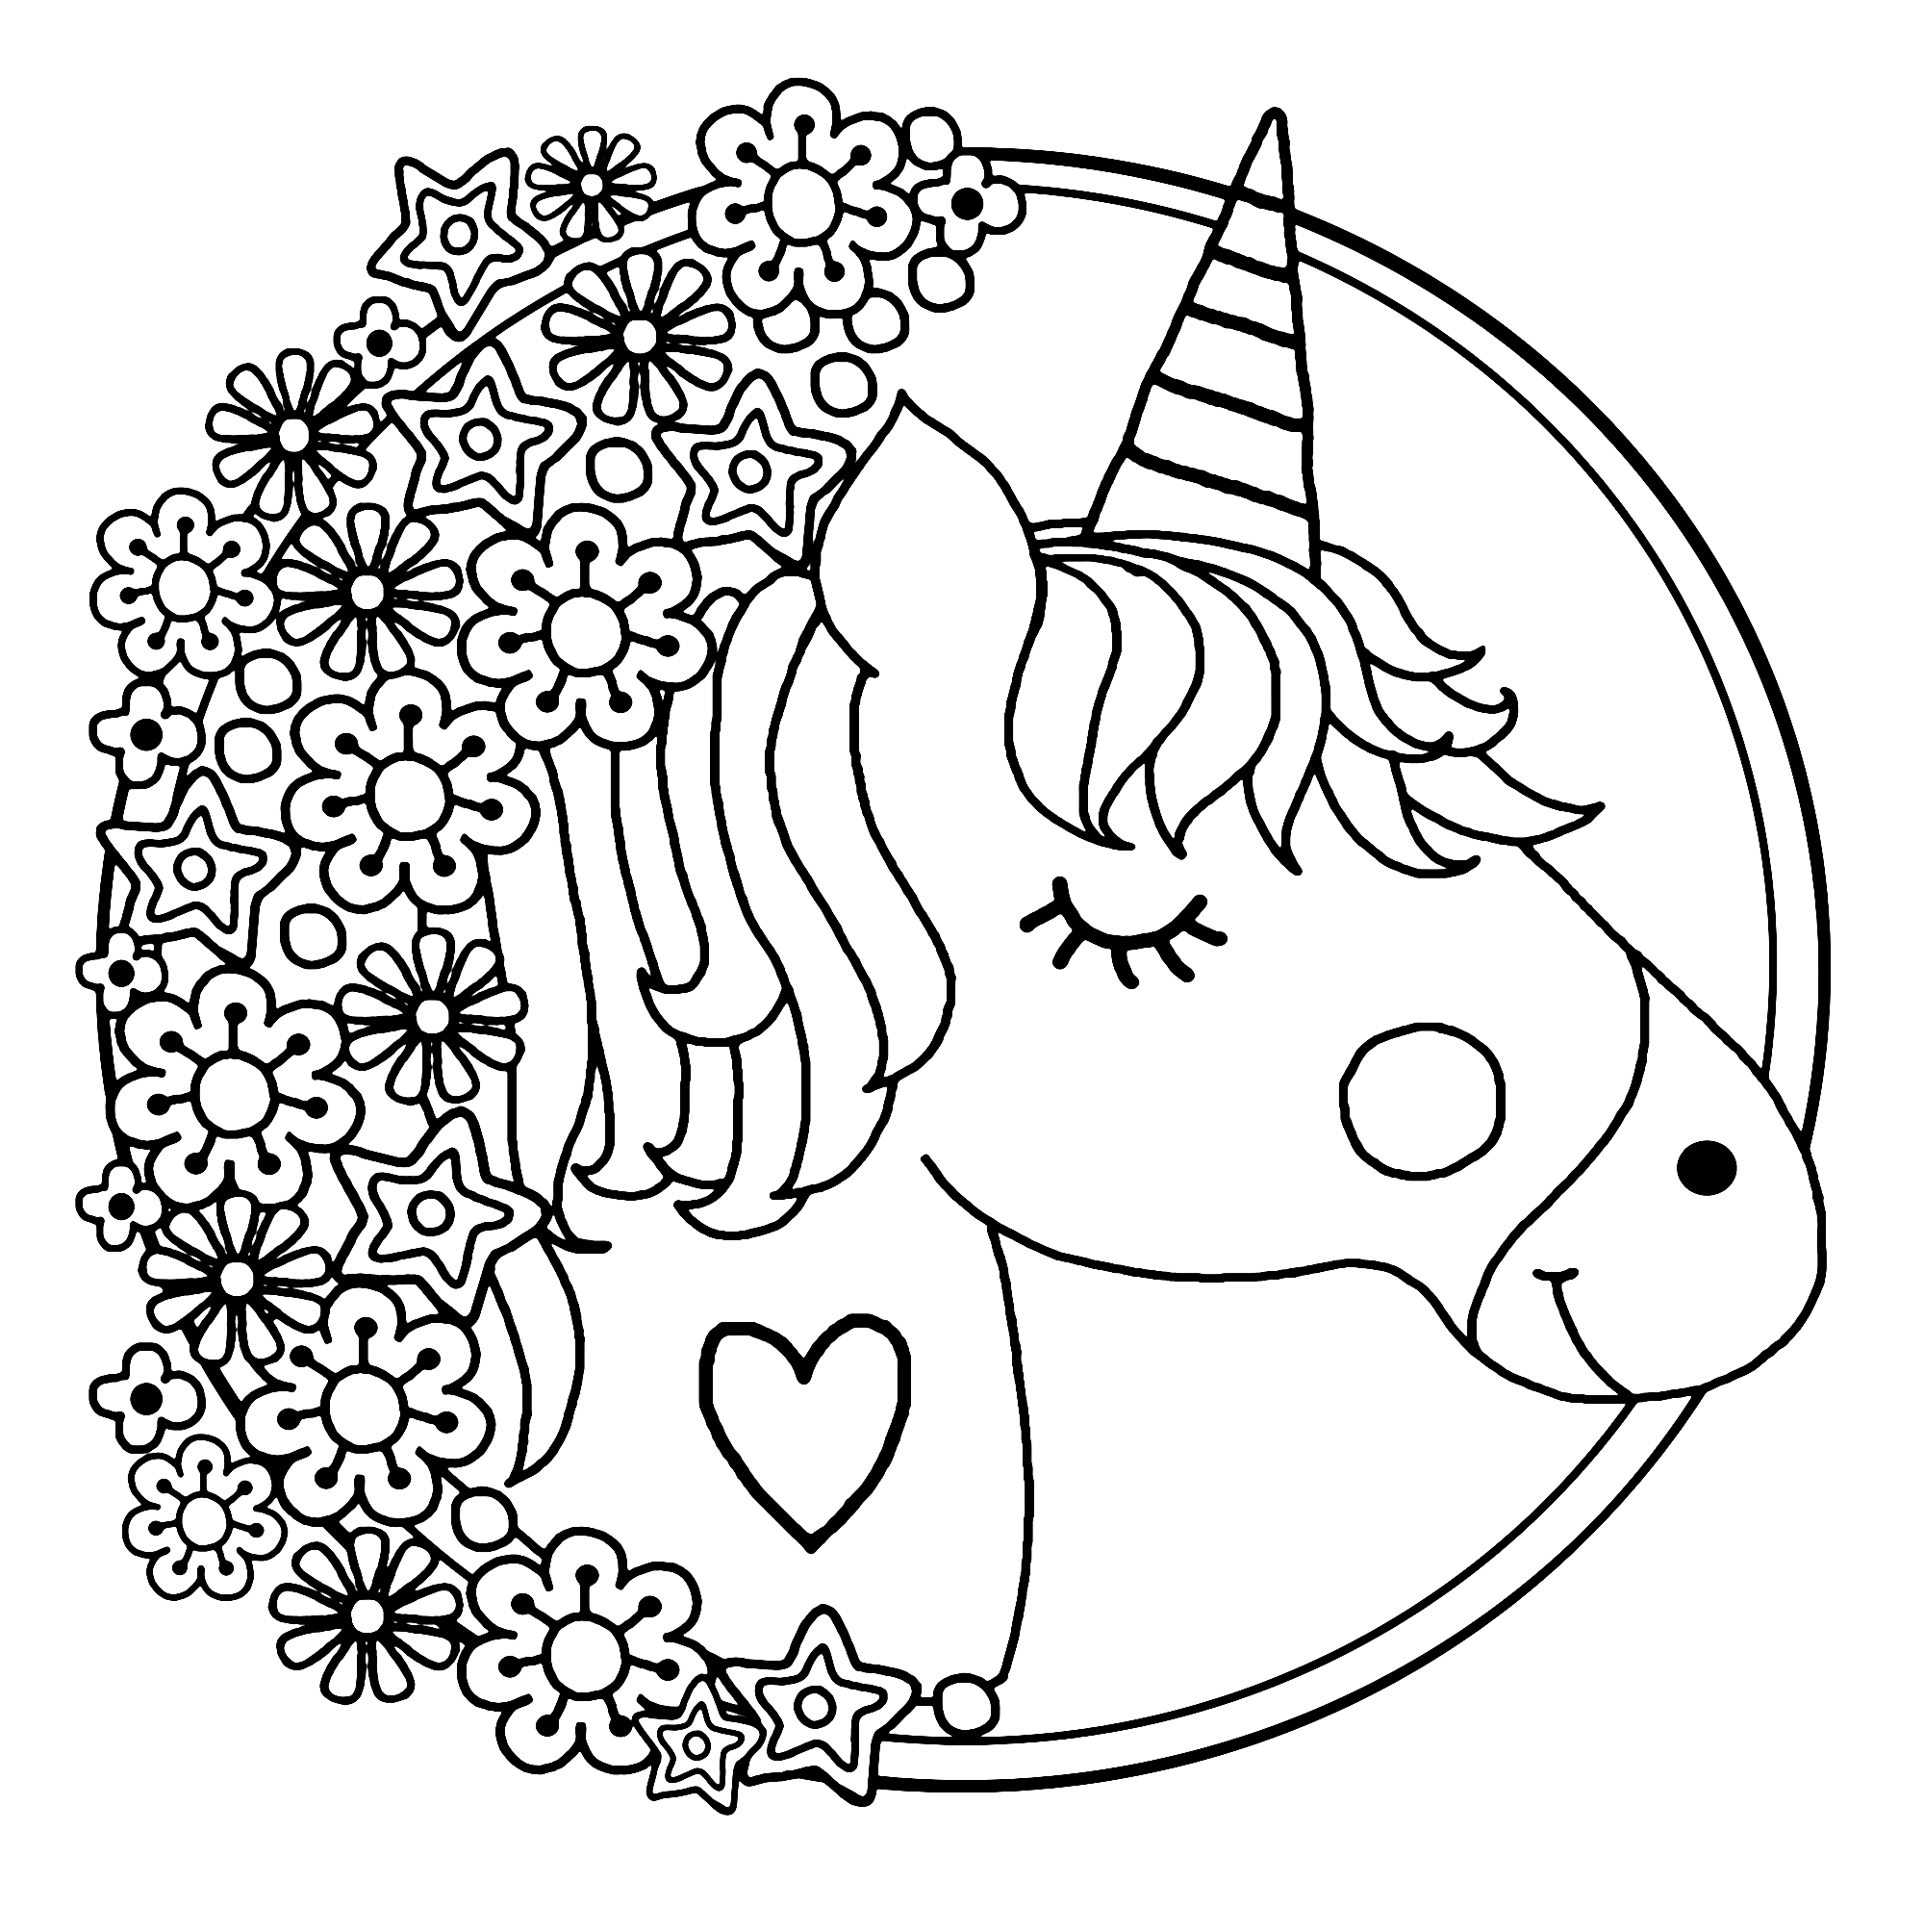 Adorable Unicorn Coloring Pages for Girls and Adults (Updated) Printcolor